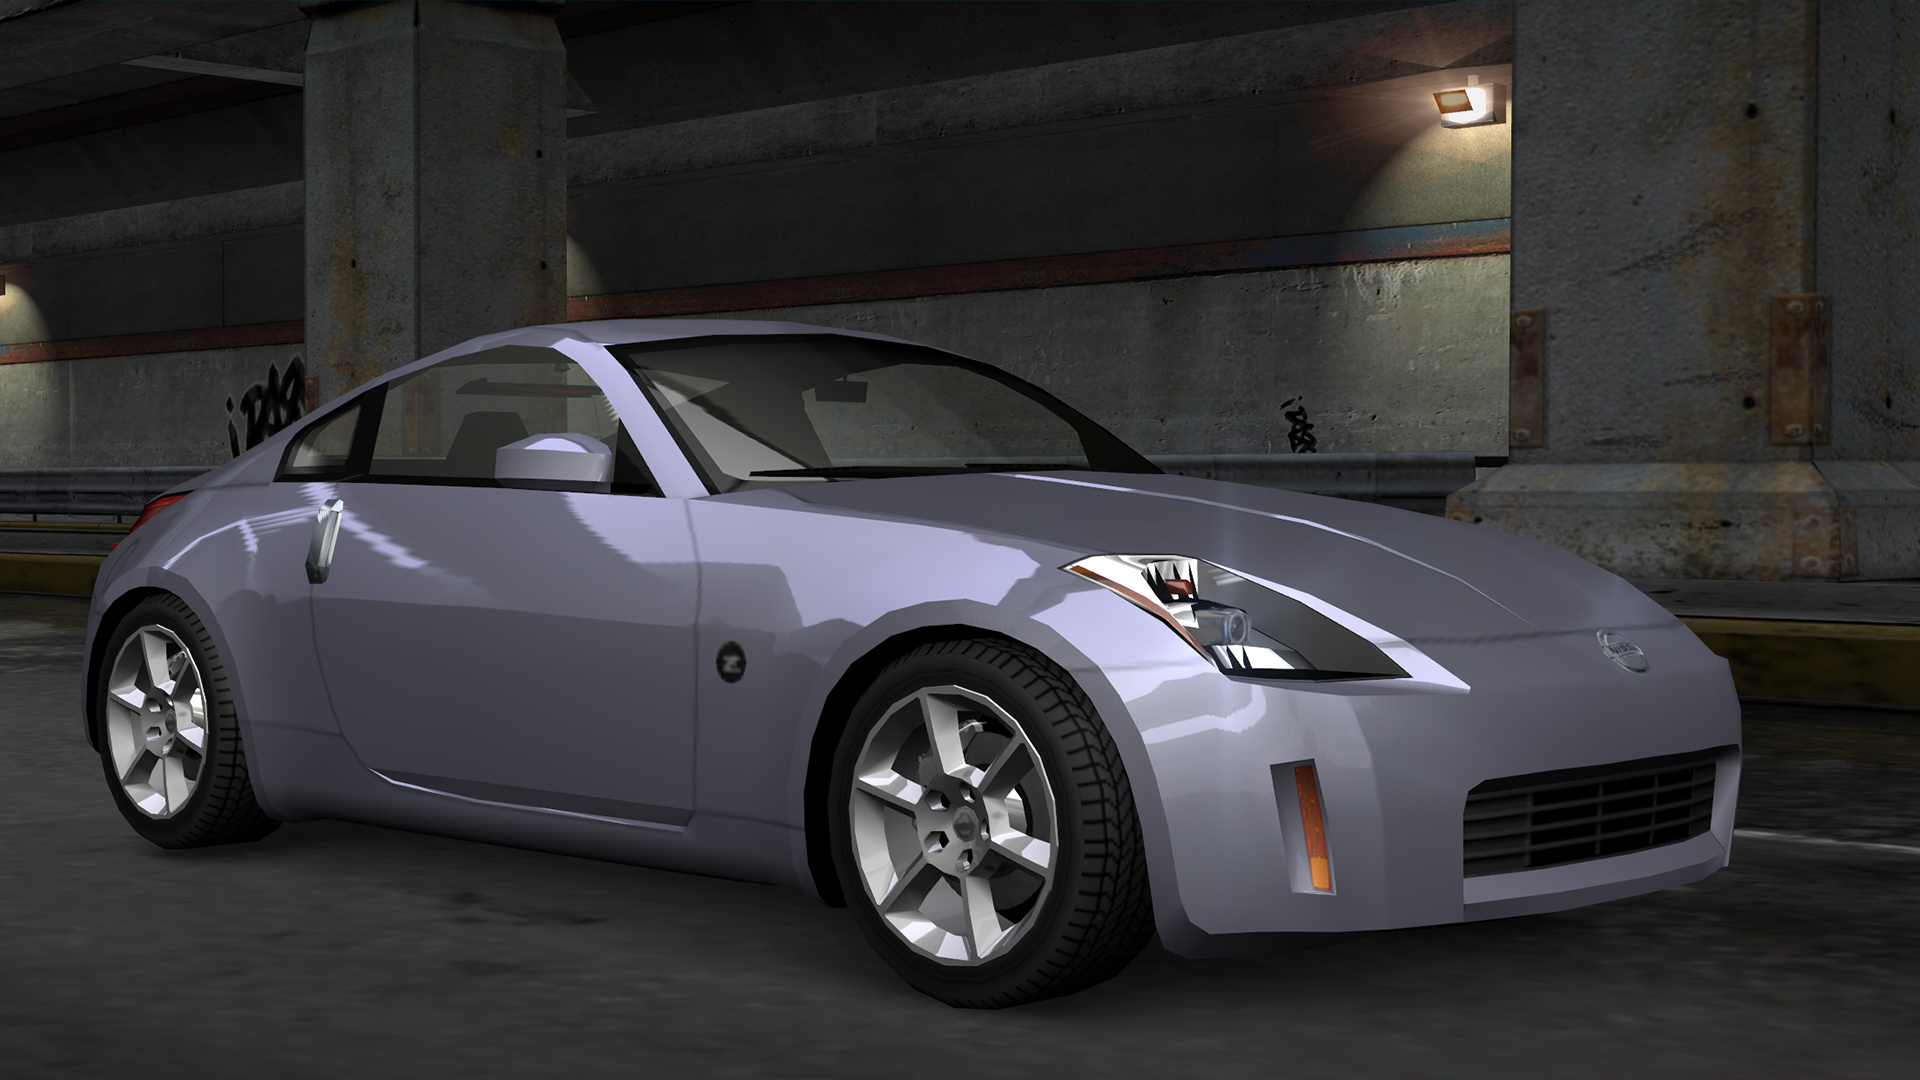 Need for Speed: Carbon, Need for Speed Wiki